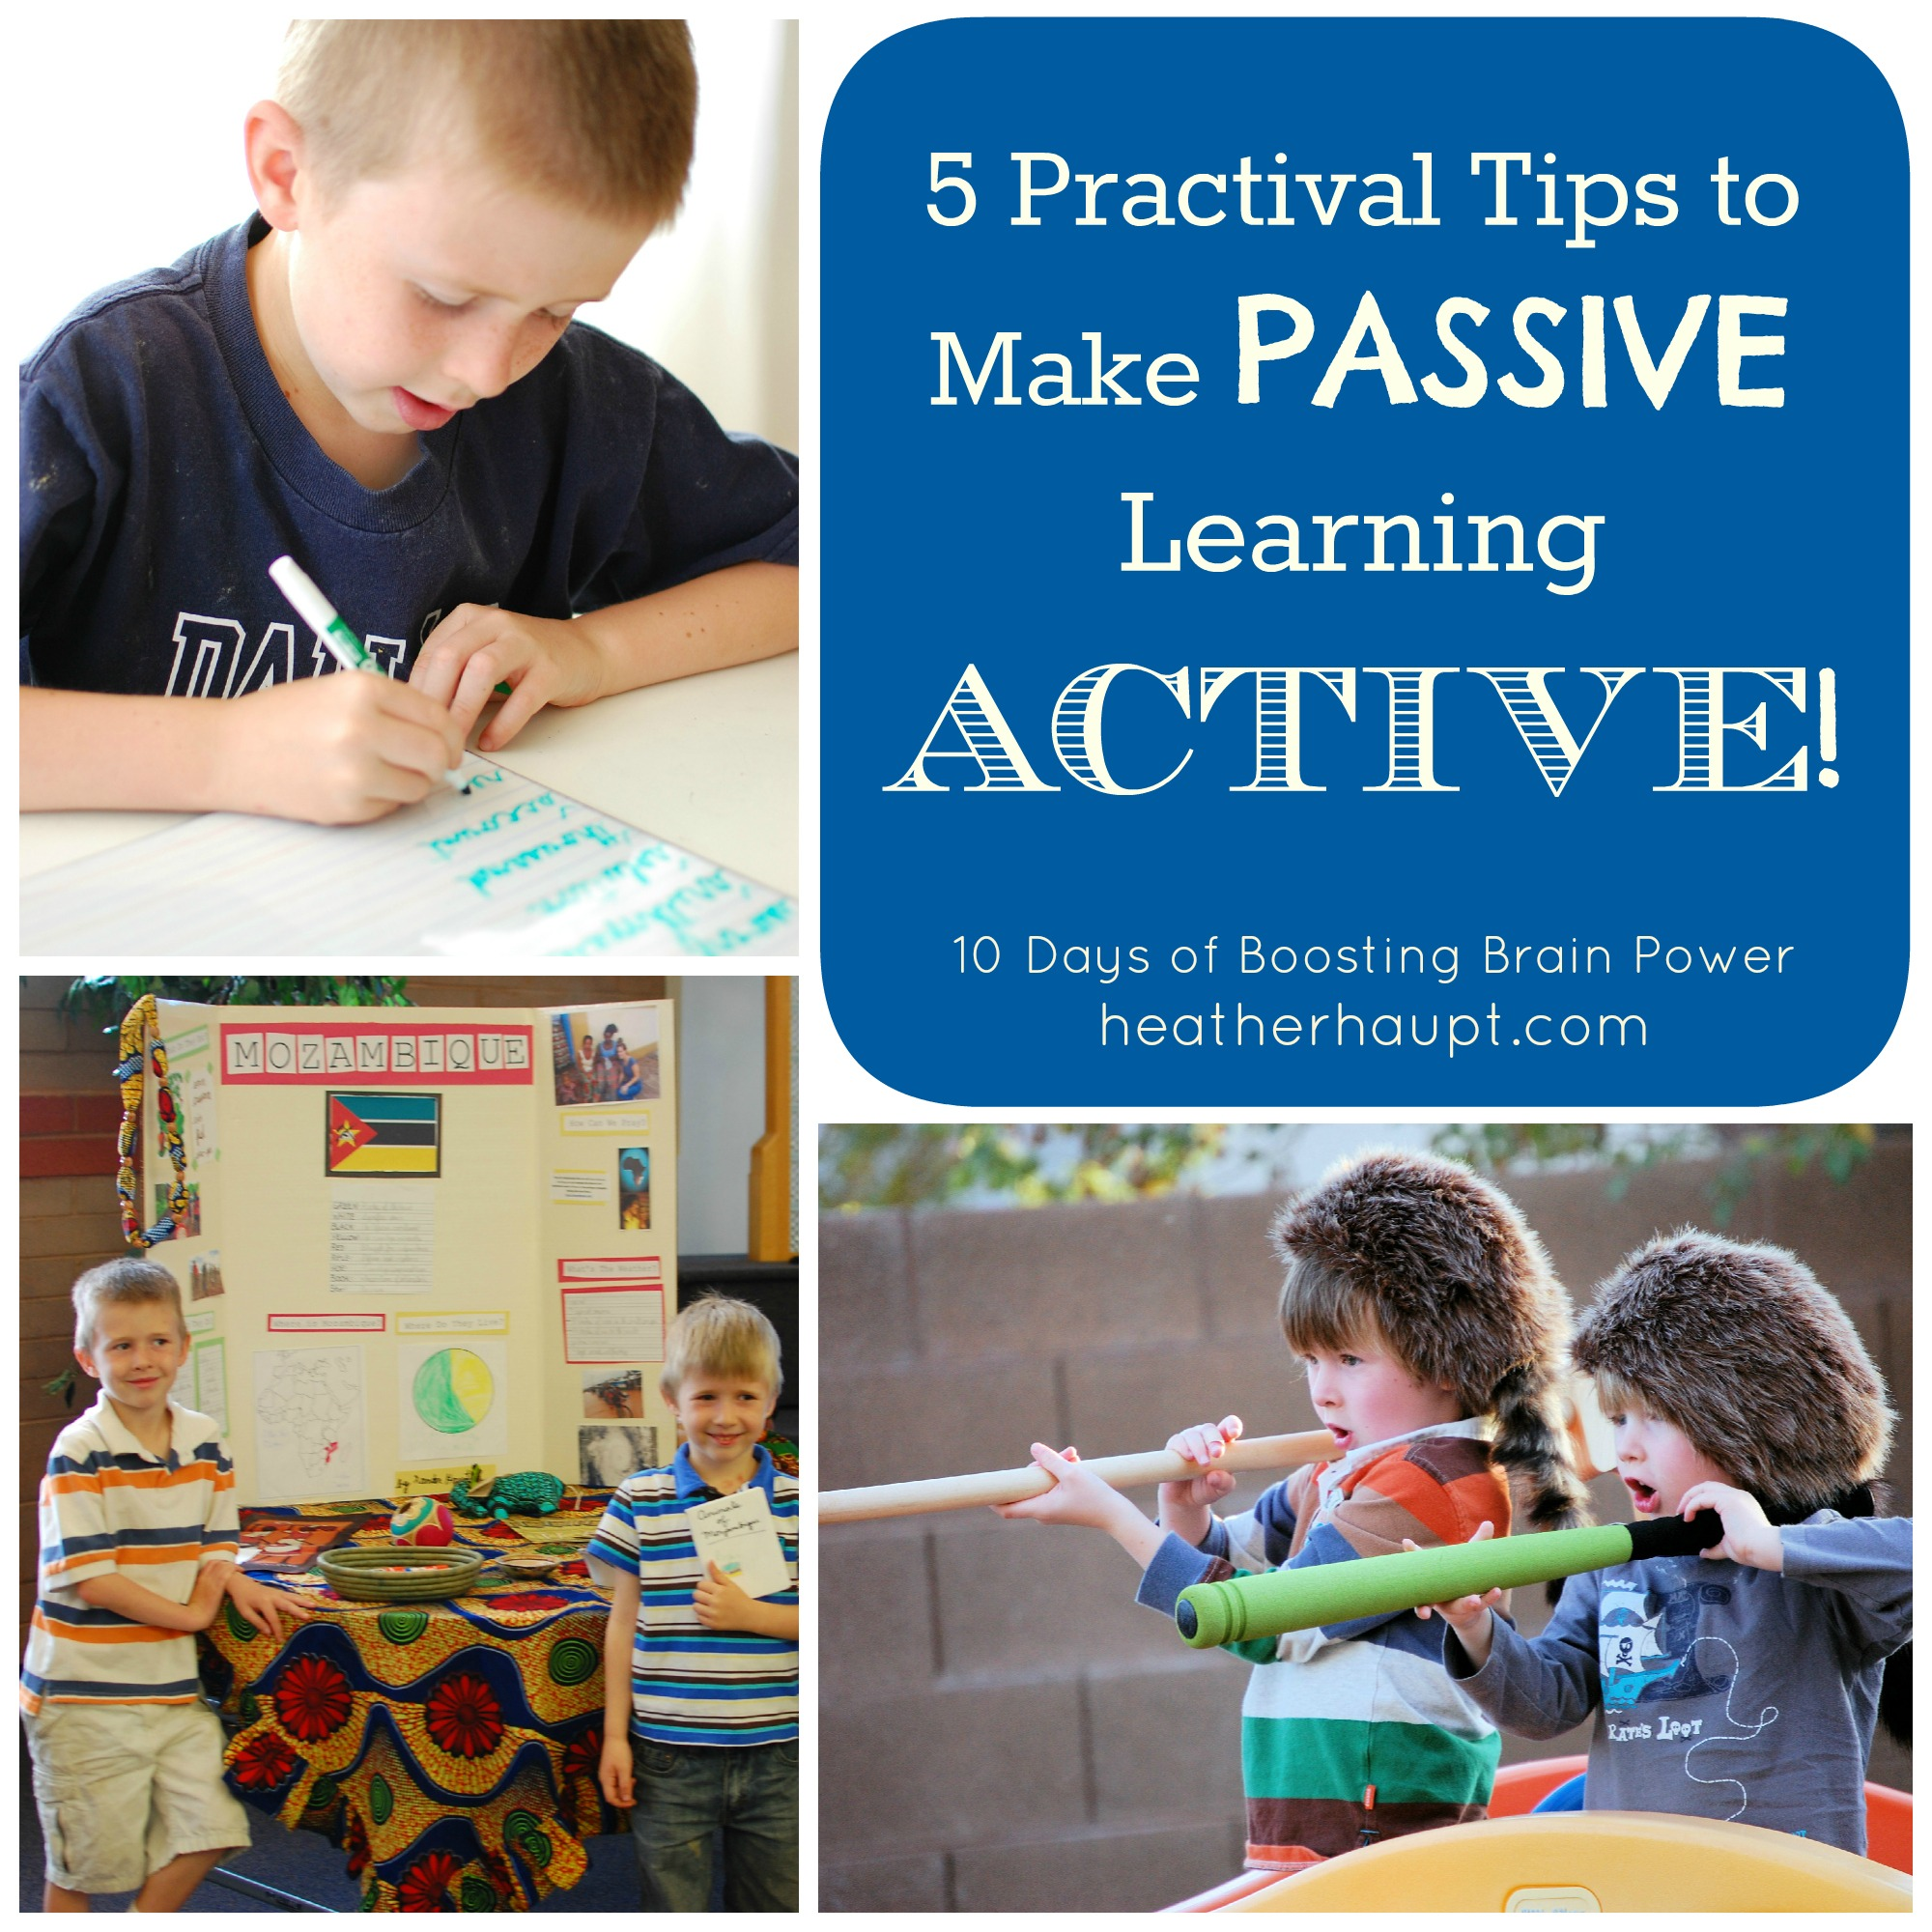 We need a varied approach! 5 great ideas to help convert passive learning to more active, engaged learning!